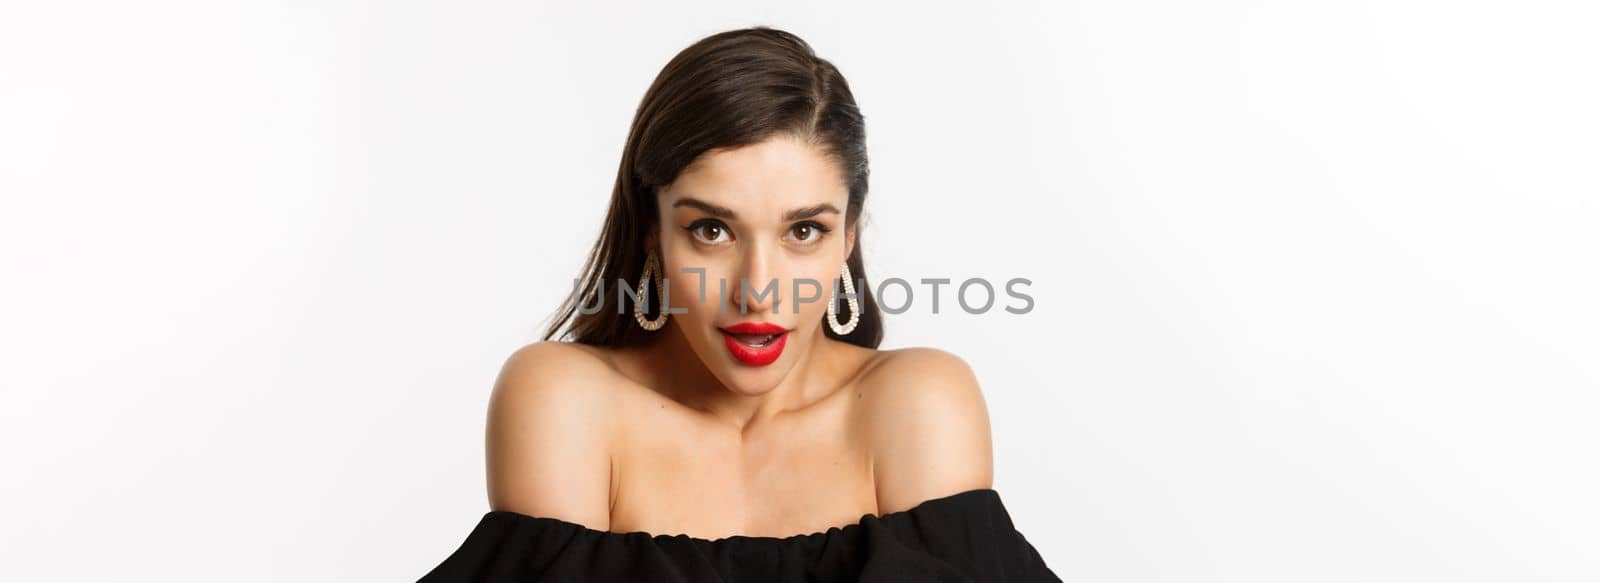 Close-up of gorgeous brunette woman wearing elegant earrings and black dress, looking sensual at camera with piercing gaze and opened mouth, standing over white background.